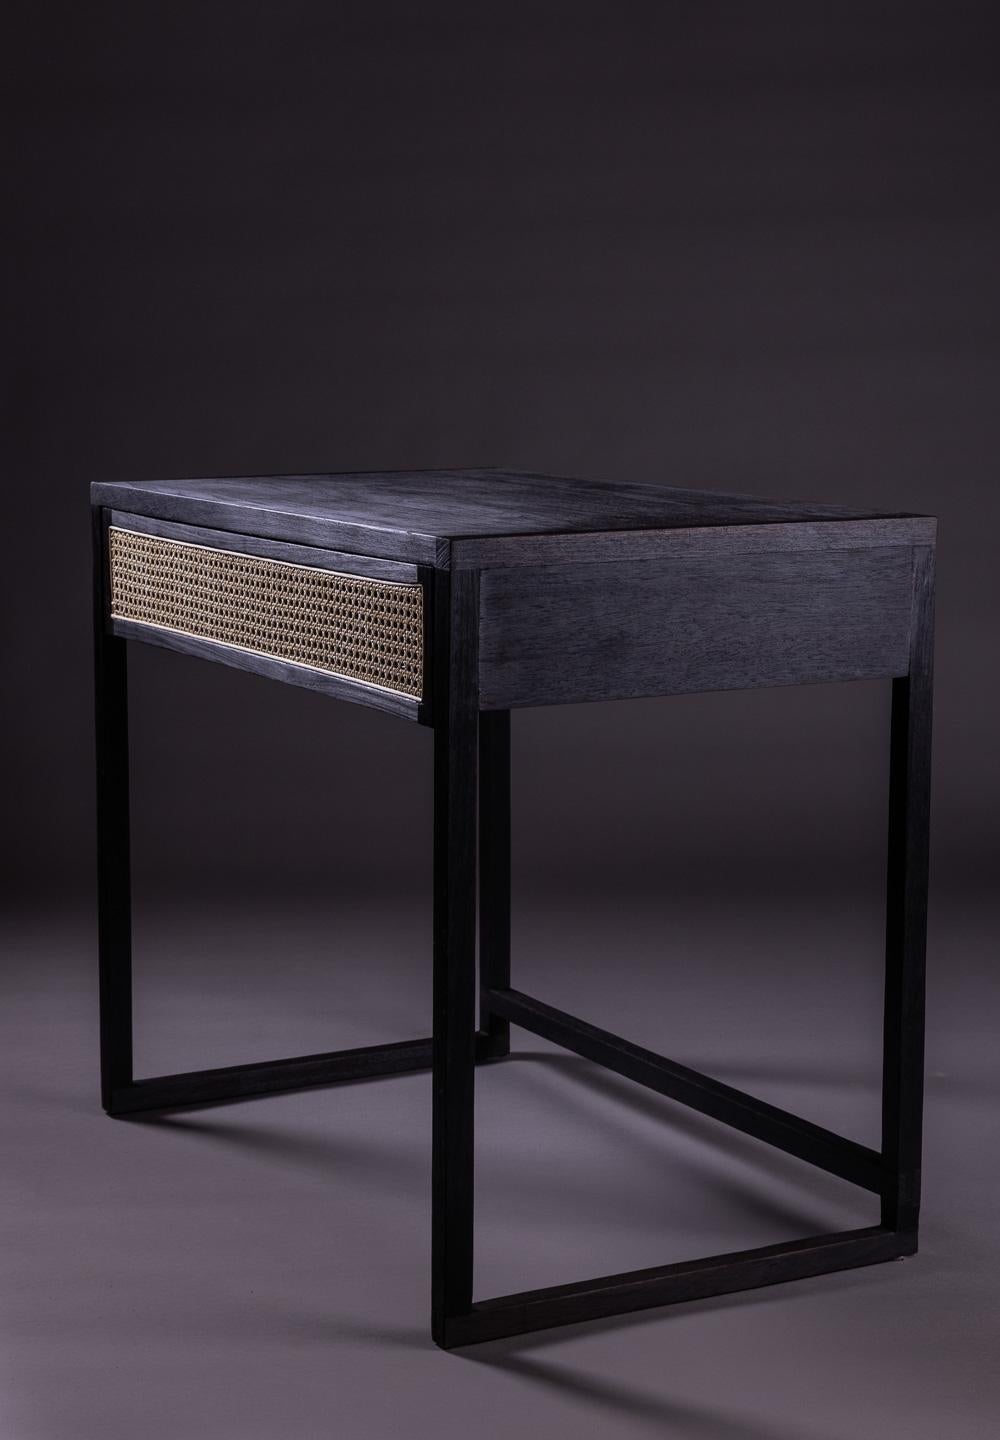 Brazilian The Square Desk, Square Armchair, Carbonized Finish with Shou Sugi Ban, Japanese For Sale